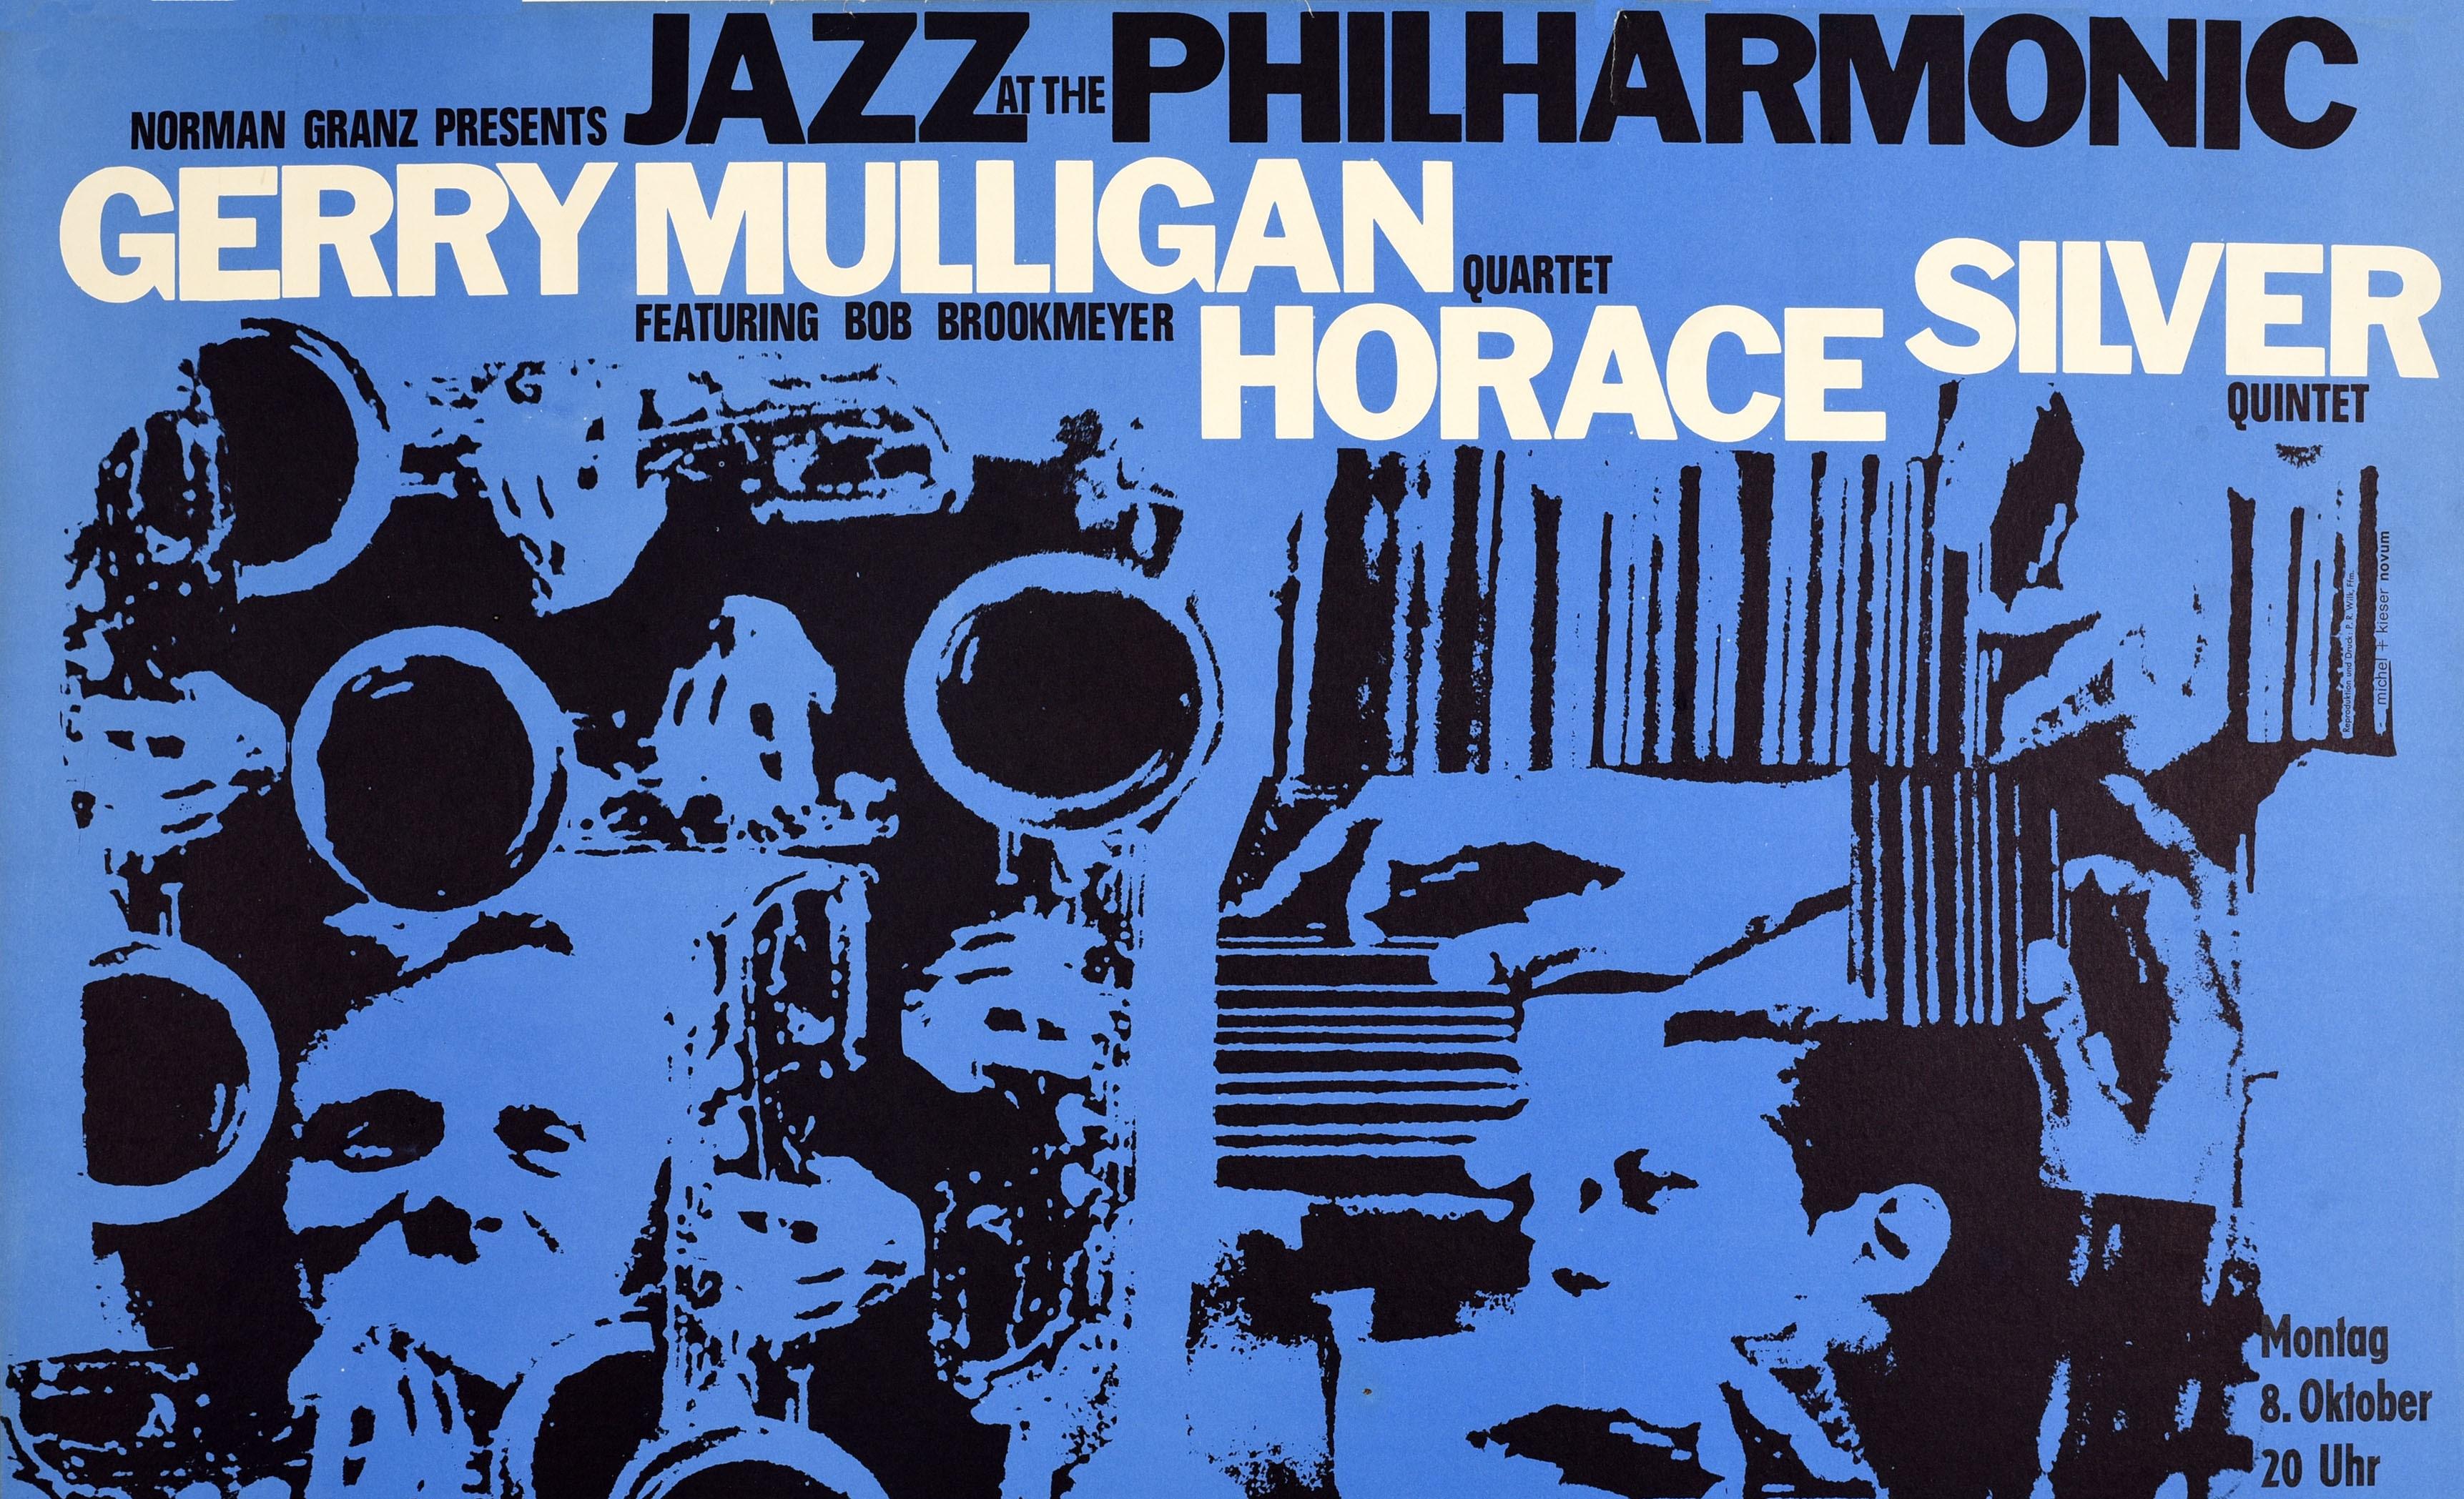 Original vintage music poster for the Norman Granz presents Jazz at the Philharmonic Gerry Mulligan Quartet featuring Bob Brookmeyer Horace Silver Quintet concert depicting a great design of musicians on the blue background, the title in bold white